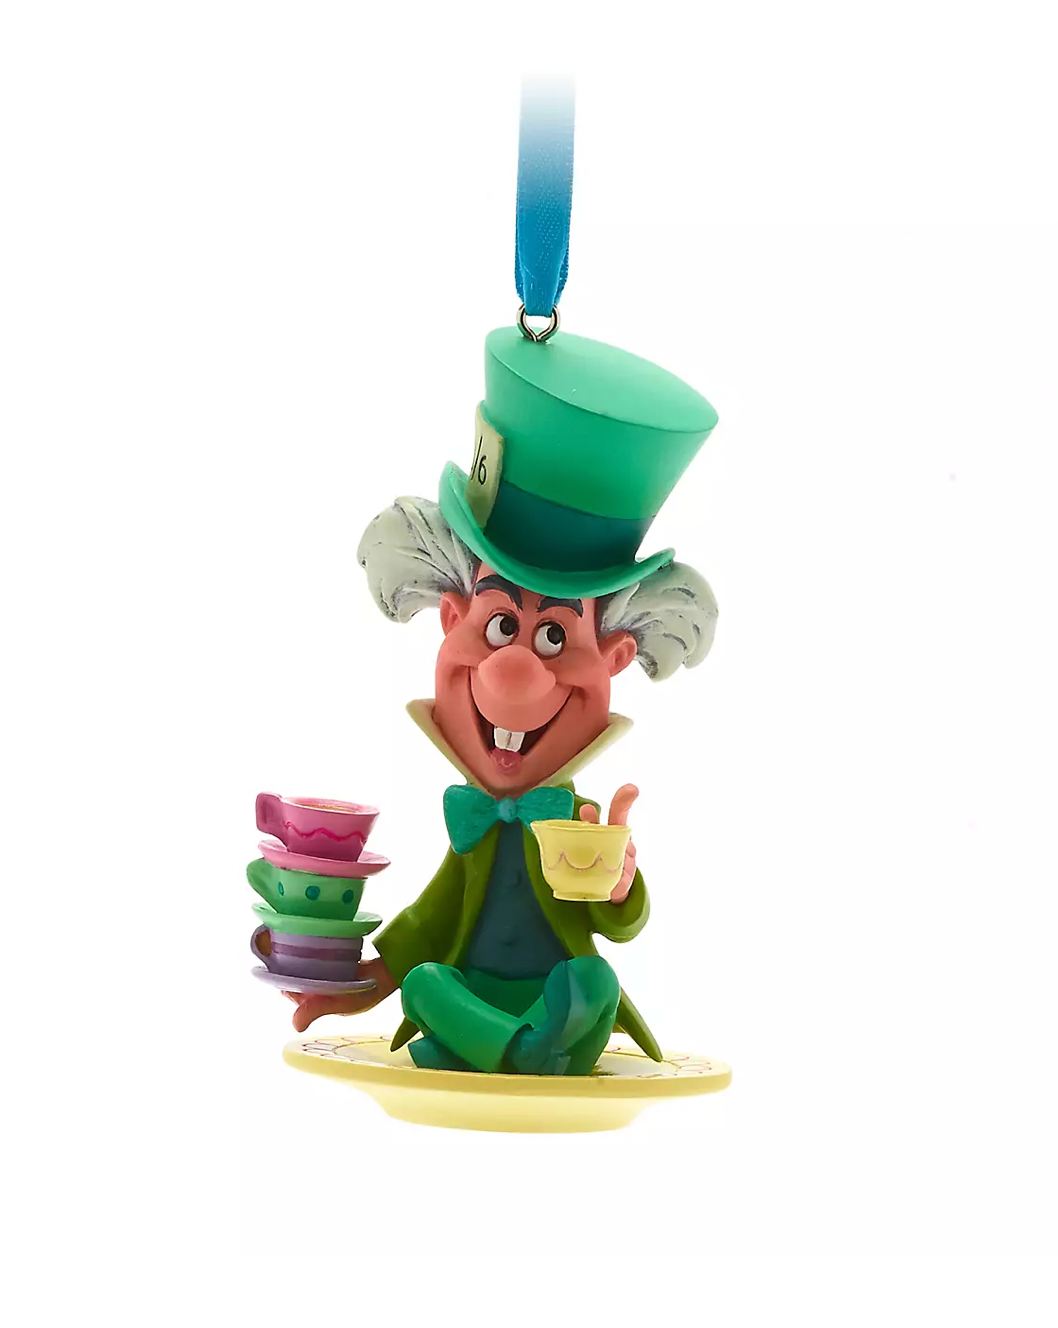 Disney Sketchbook Mad Hatter Alice in Wonderland Christmas Ornament New with Tag